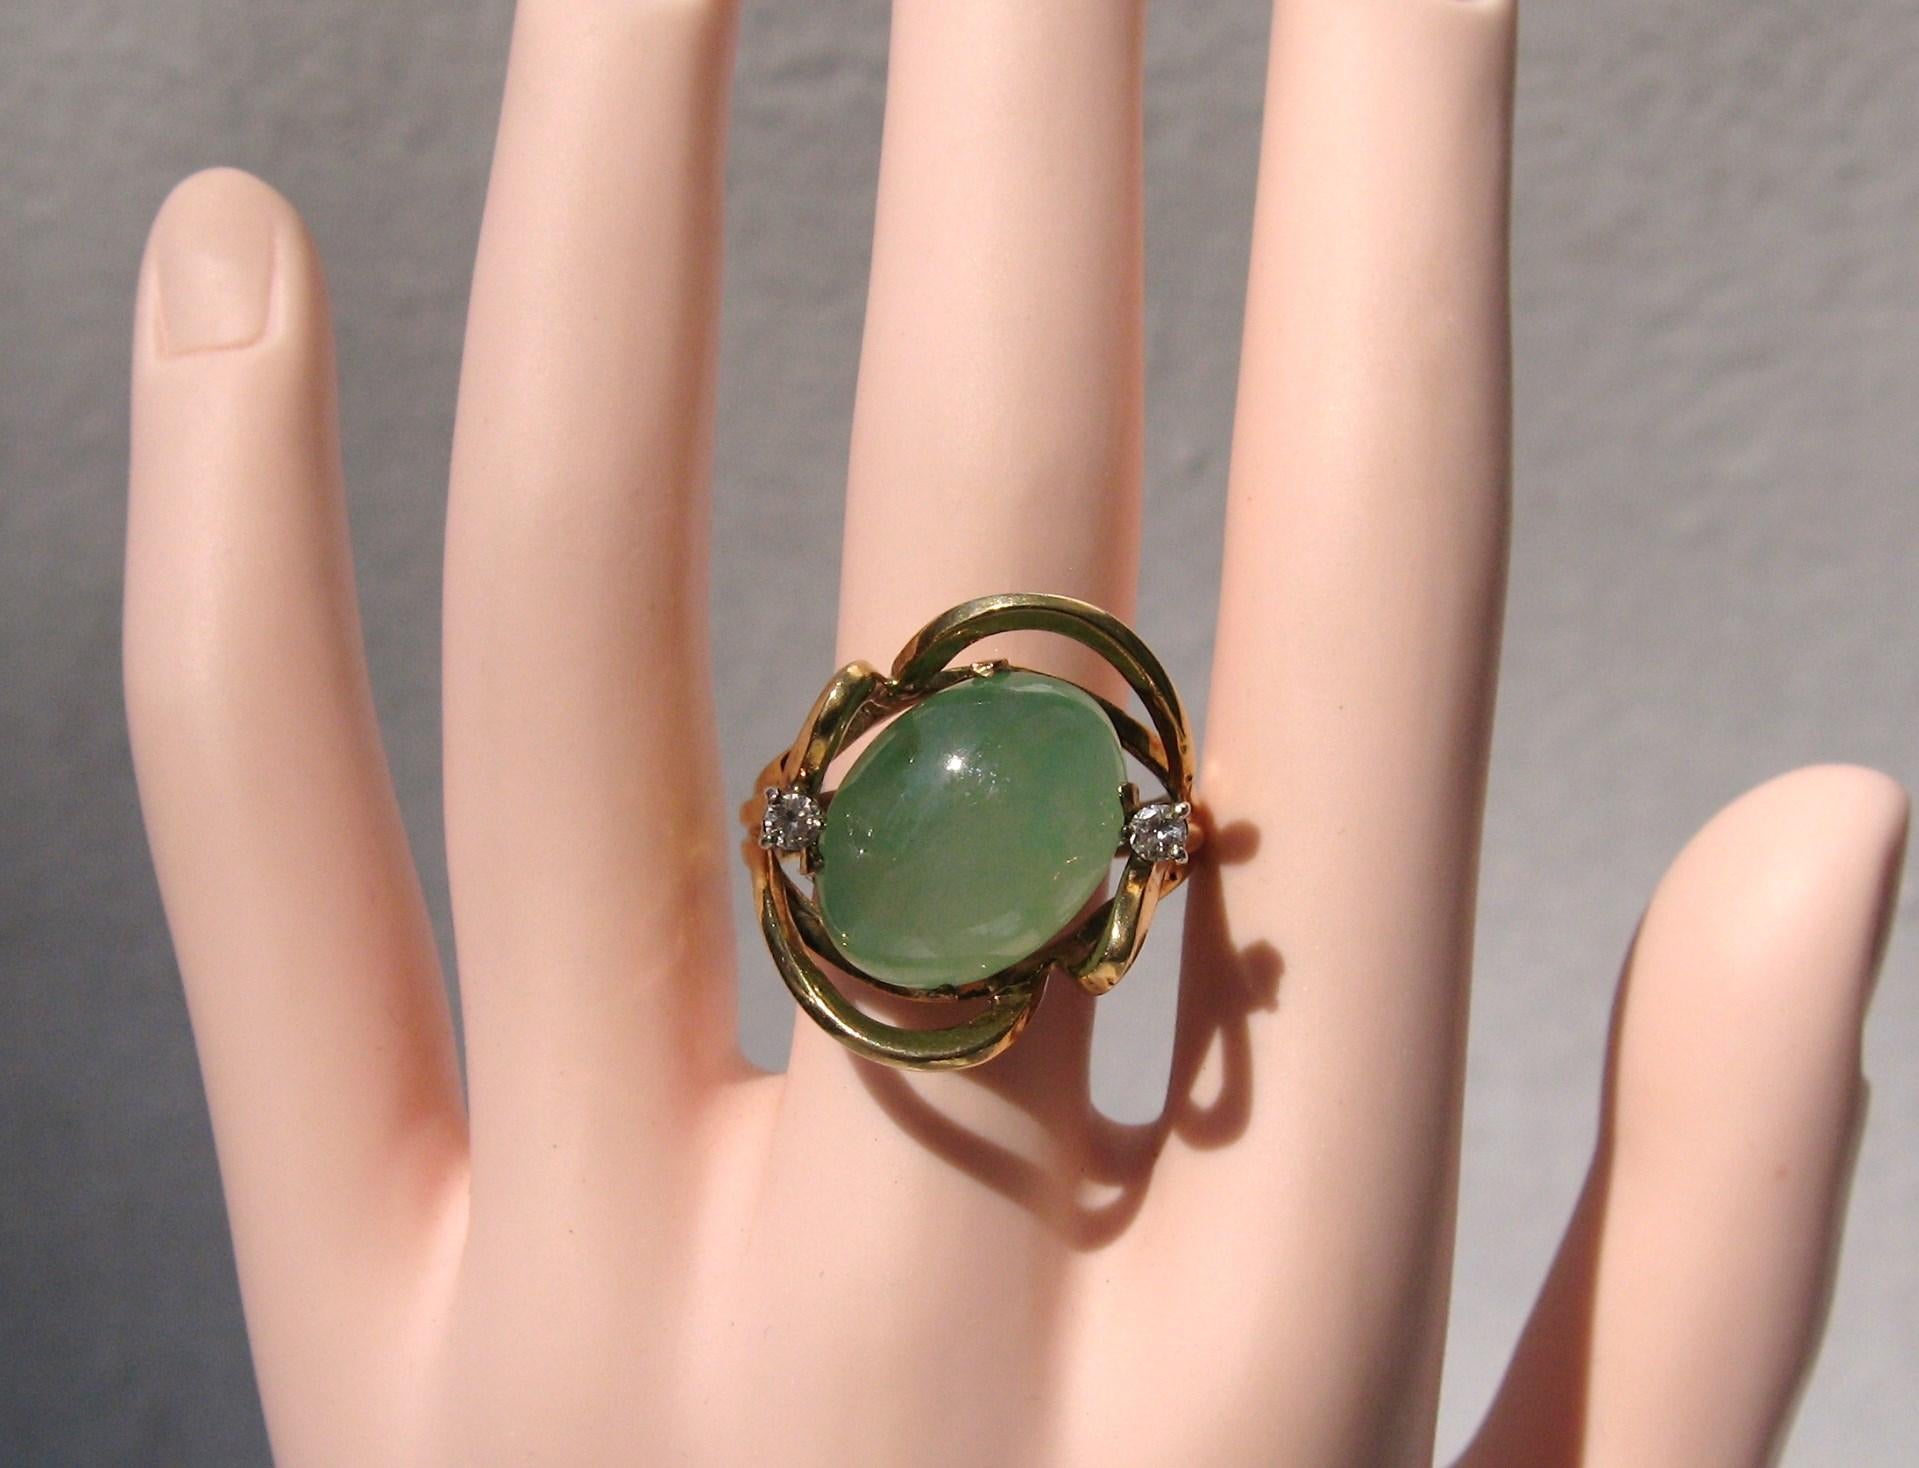 Stunning 18K gold Green Jade & Diamond Cocktail ring. Large center jade, measuring 17.5mm x 13.6mm x 7.75mm. Approximately 15 Carats. Diamonds are accents at about .5 points each. The ring has a sizer inside of the band that allows several sizes to